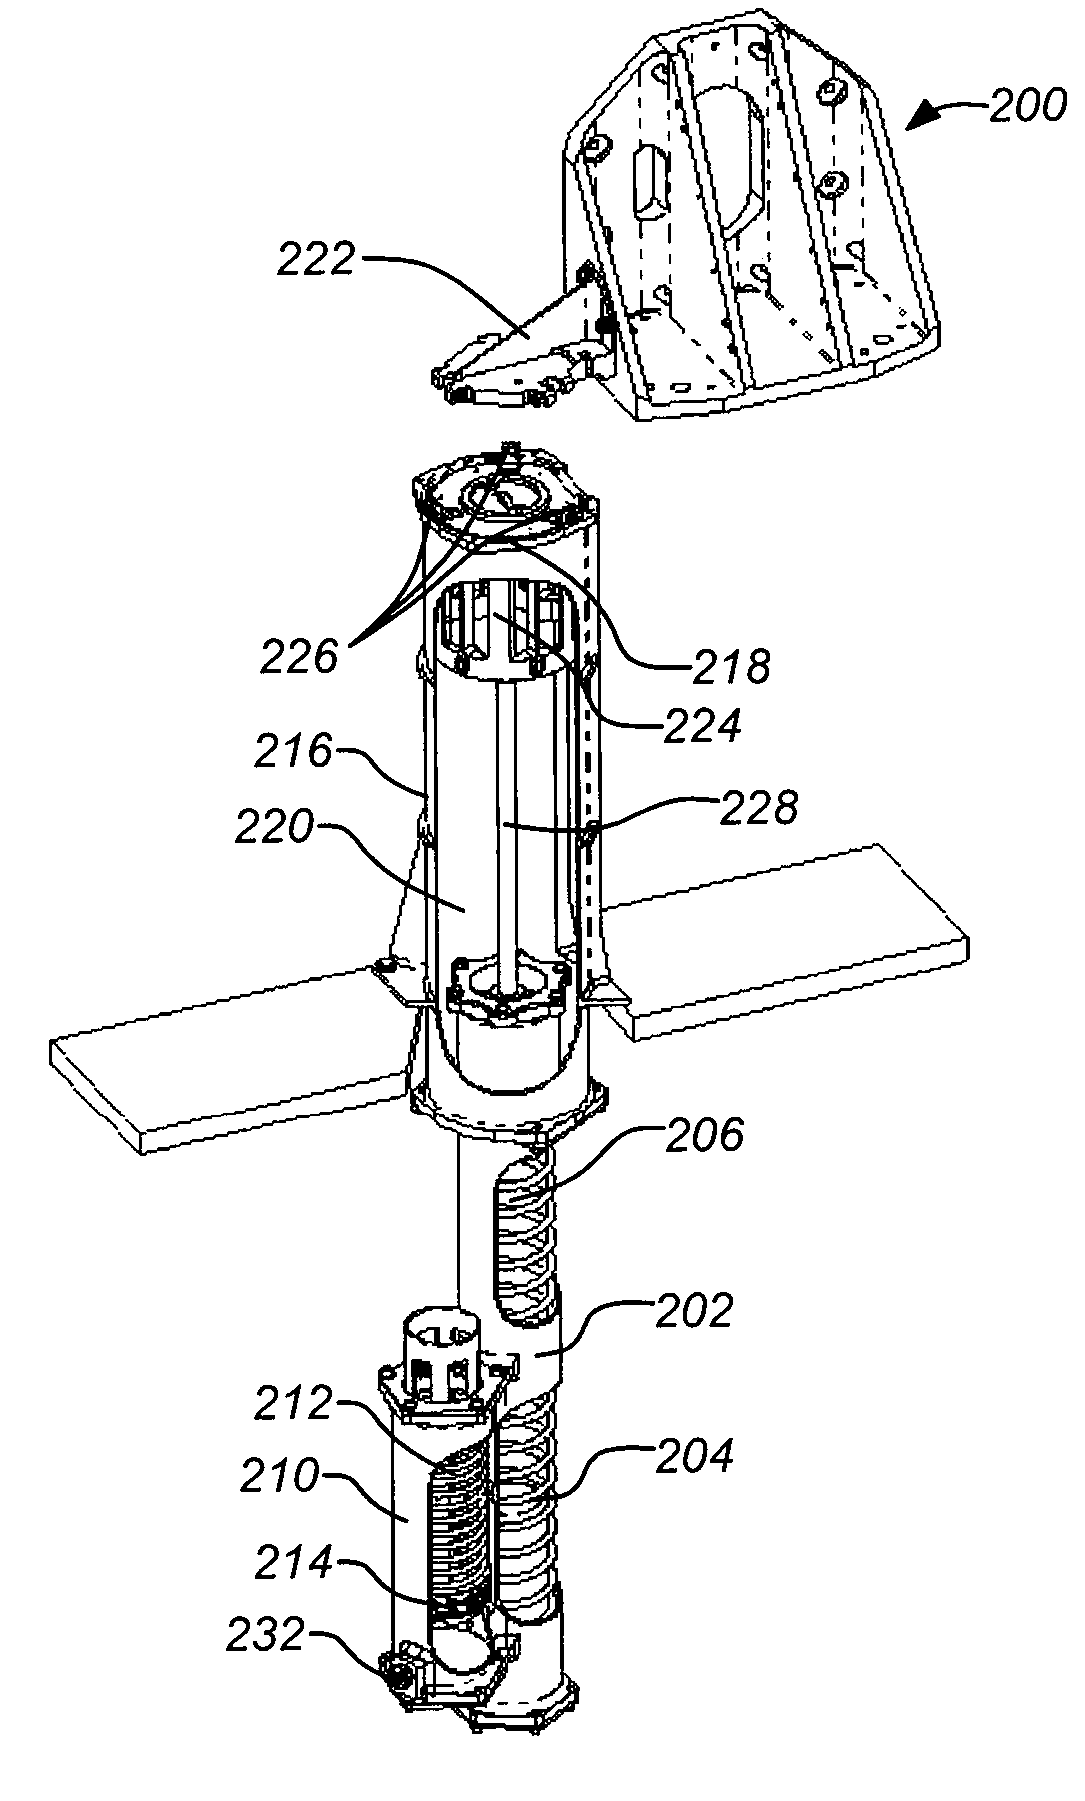 Spacecraft low tumble linear release system